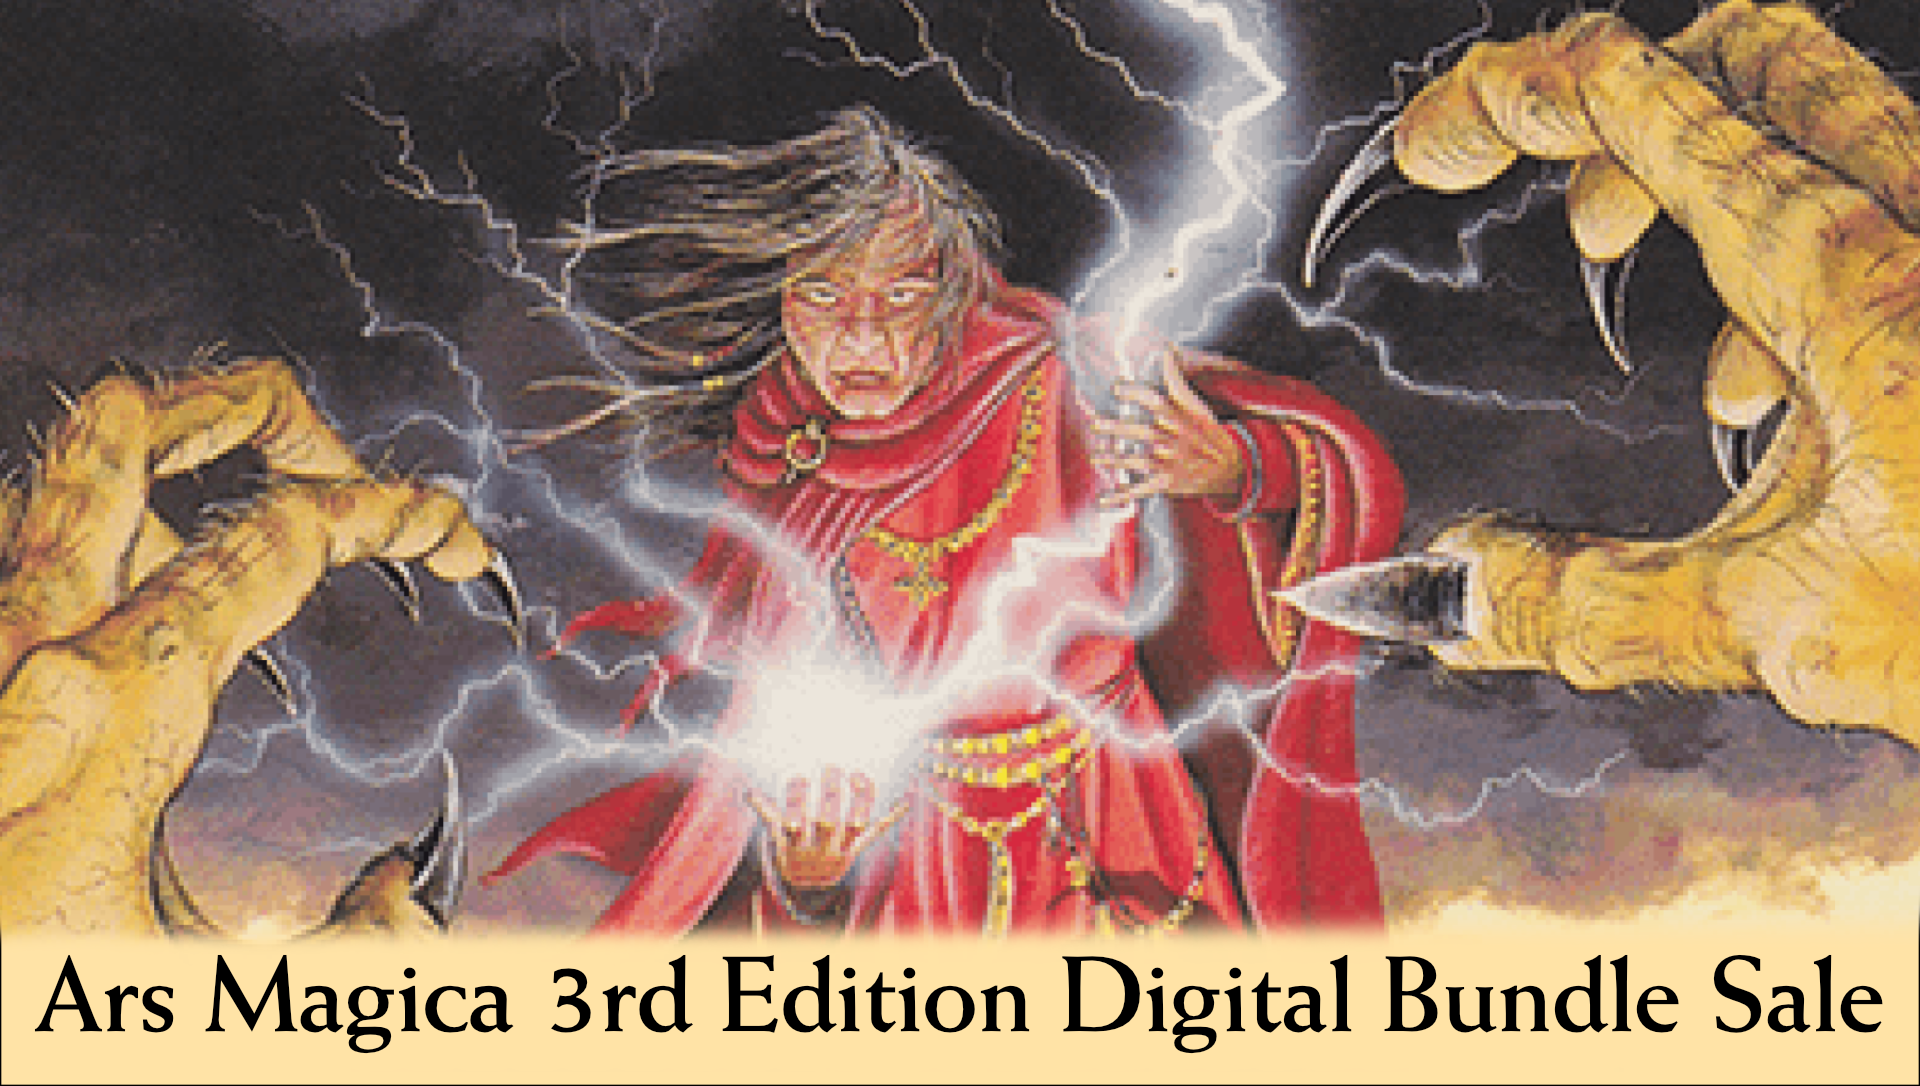 Another Sale! Get the Ars Magica 3rd Edition Digital Bundle today!